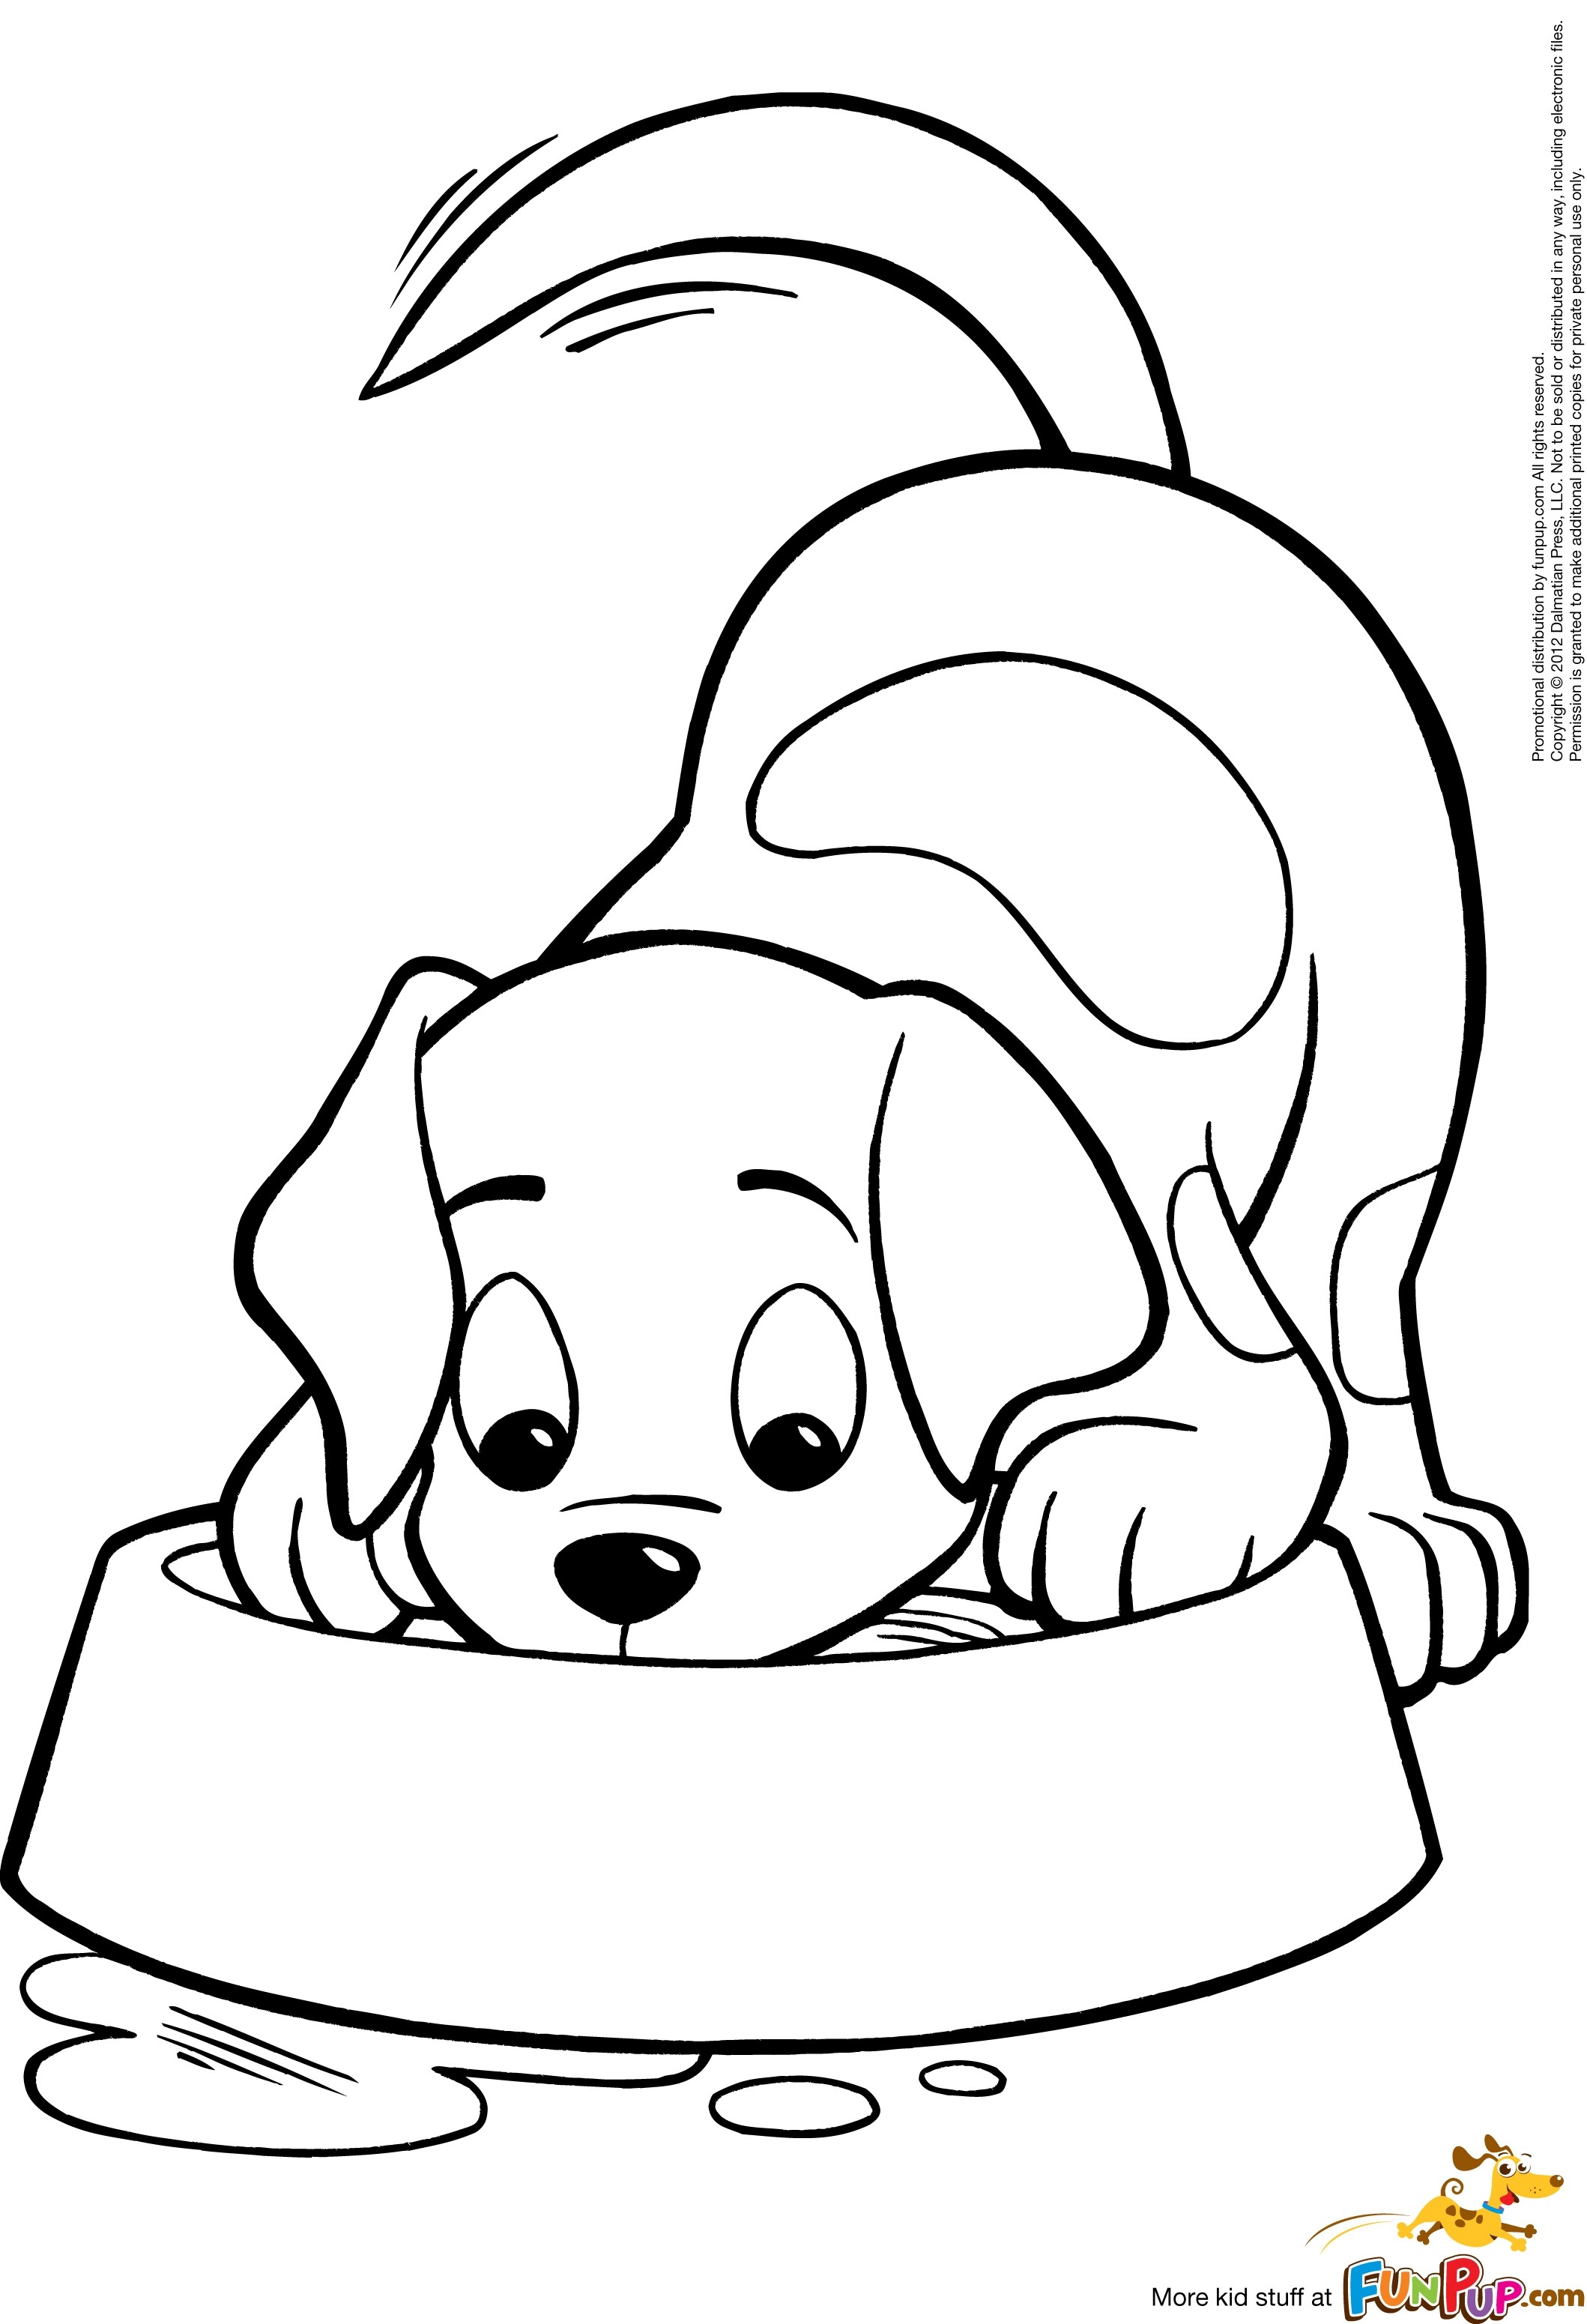 Pomeranian Coloring Pages at GetColorings.com | Free printable